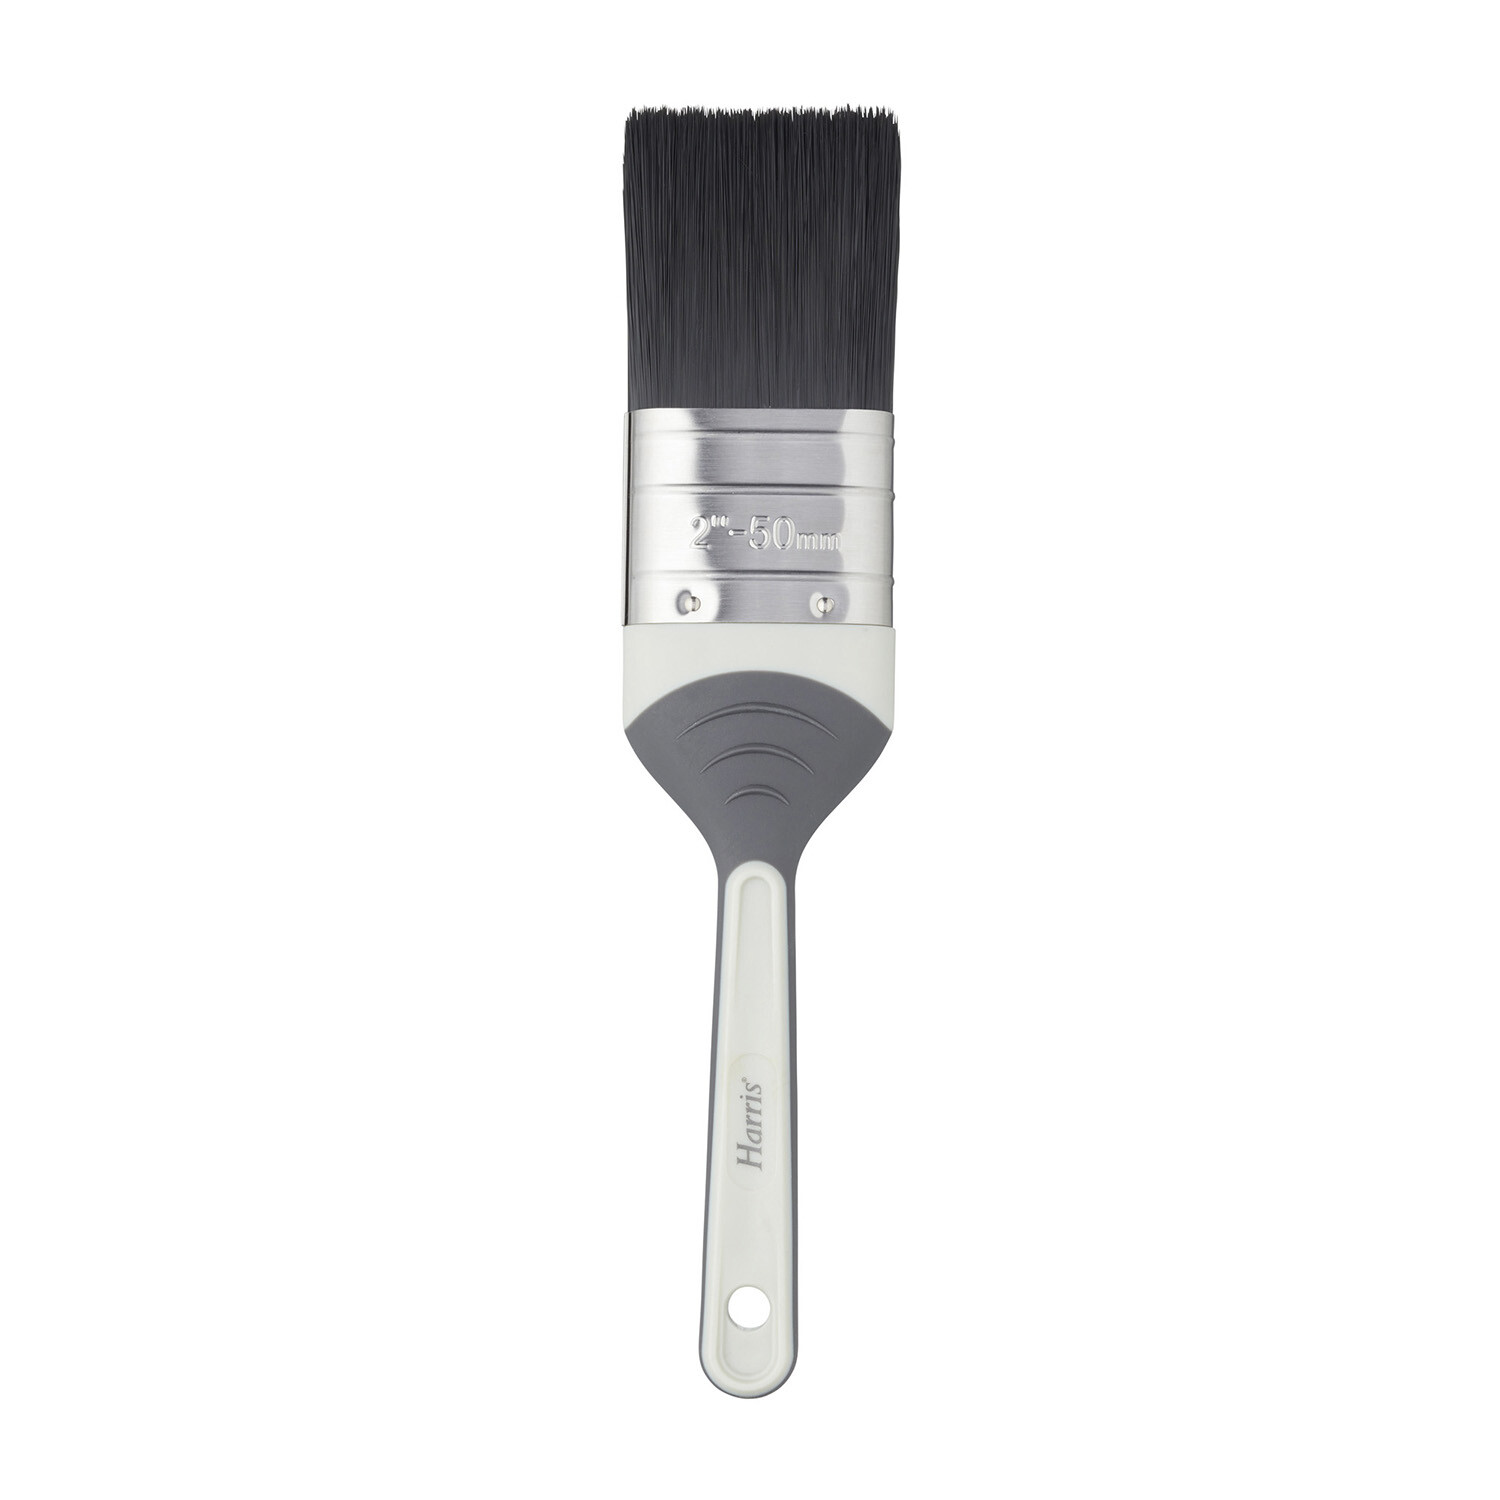 Harris 2 inch Seriously Good Woodwork Gloss Paint Brush Image 2